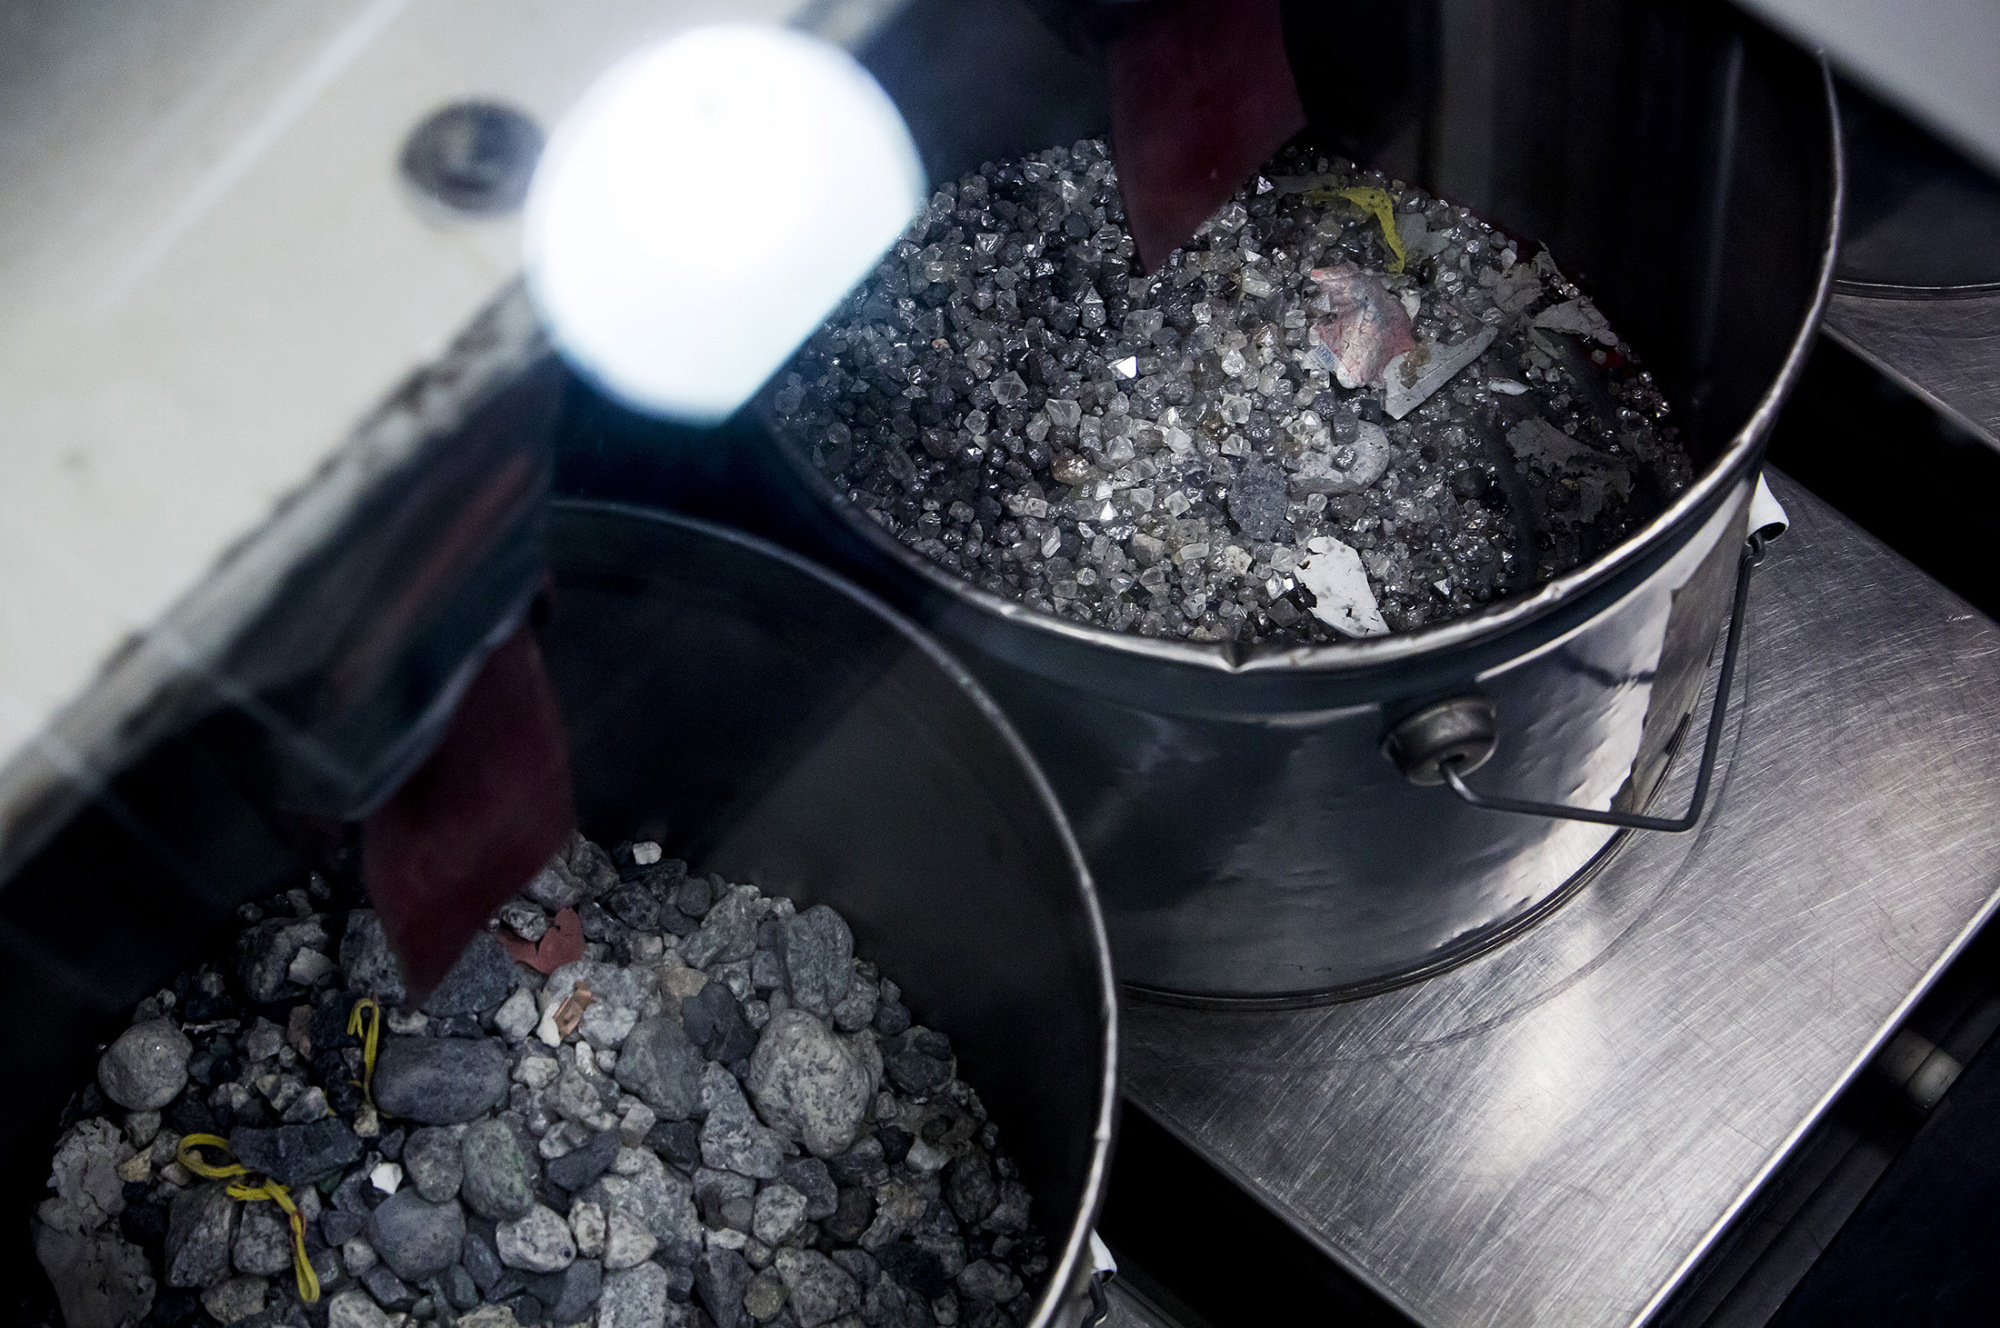 Diamonds are collected in buckets at the end stage of processing at the Diavik Diamond Mine facility, owned by Rio Tinto Plc and Dominion Diamond Corp., in the North Slave Region of the Northwest Territories, Canada.
